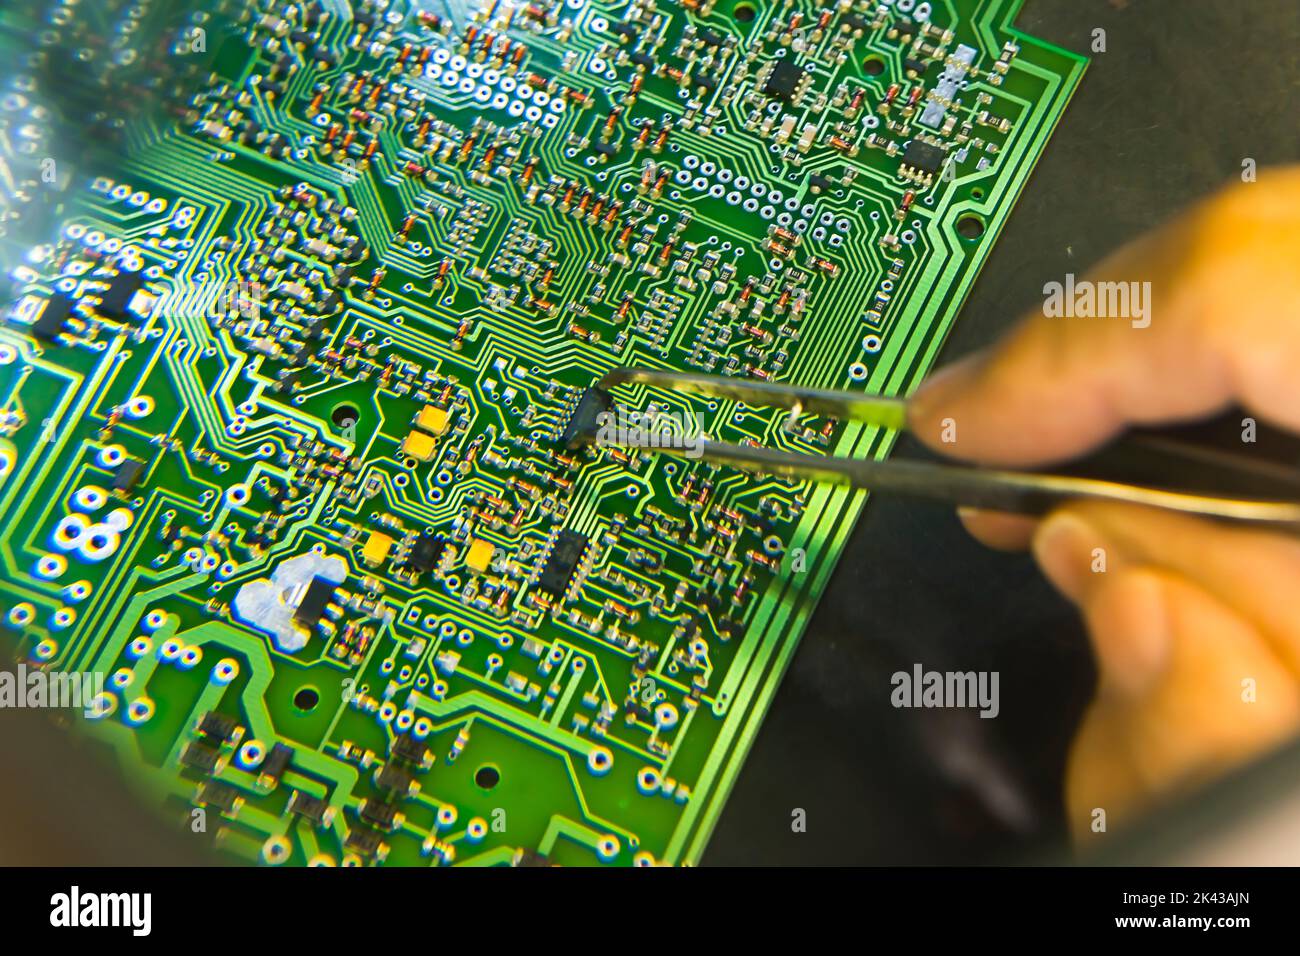 The man hand of the technician assembling manualy electronic components and microcircuits on printing circuit board with printed multi wire connections. Electronics Manufacturing Services. High quality photo Stock Photo